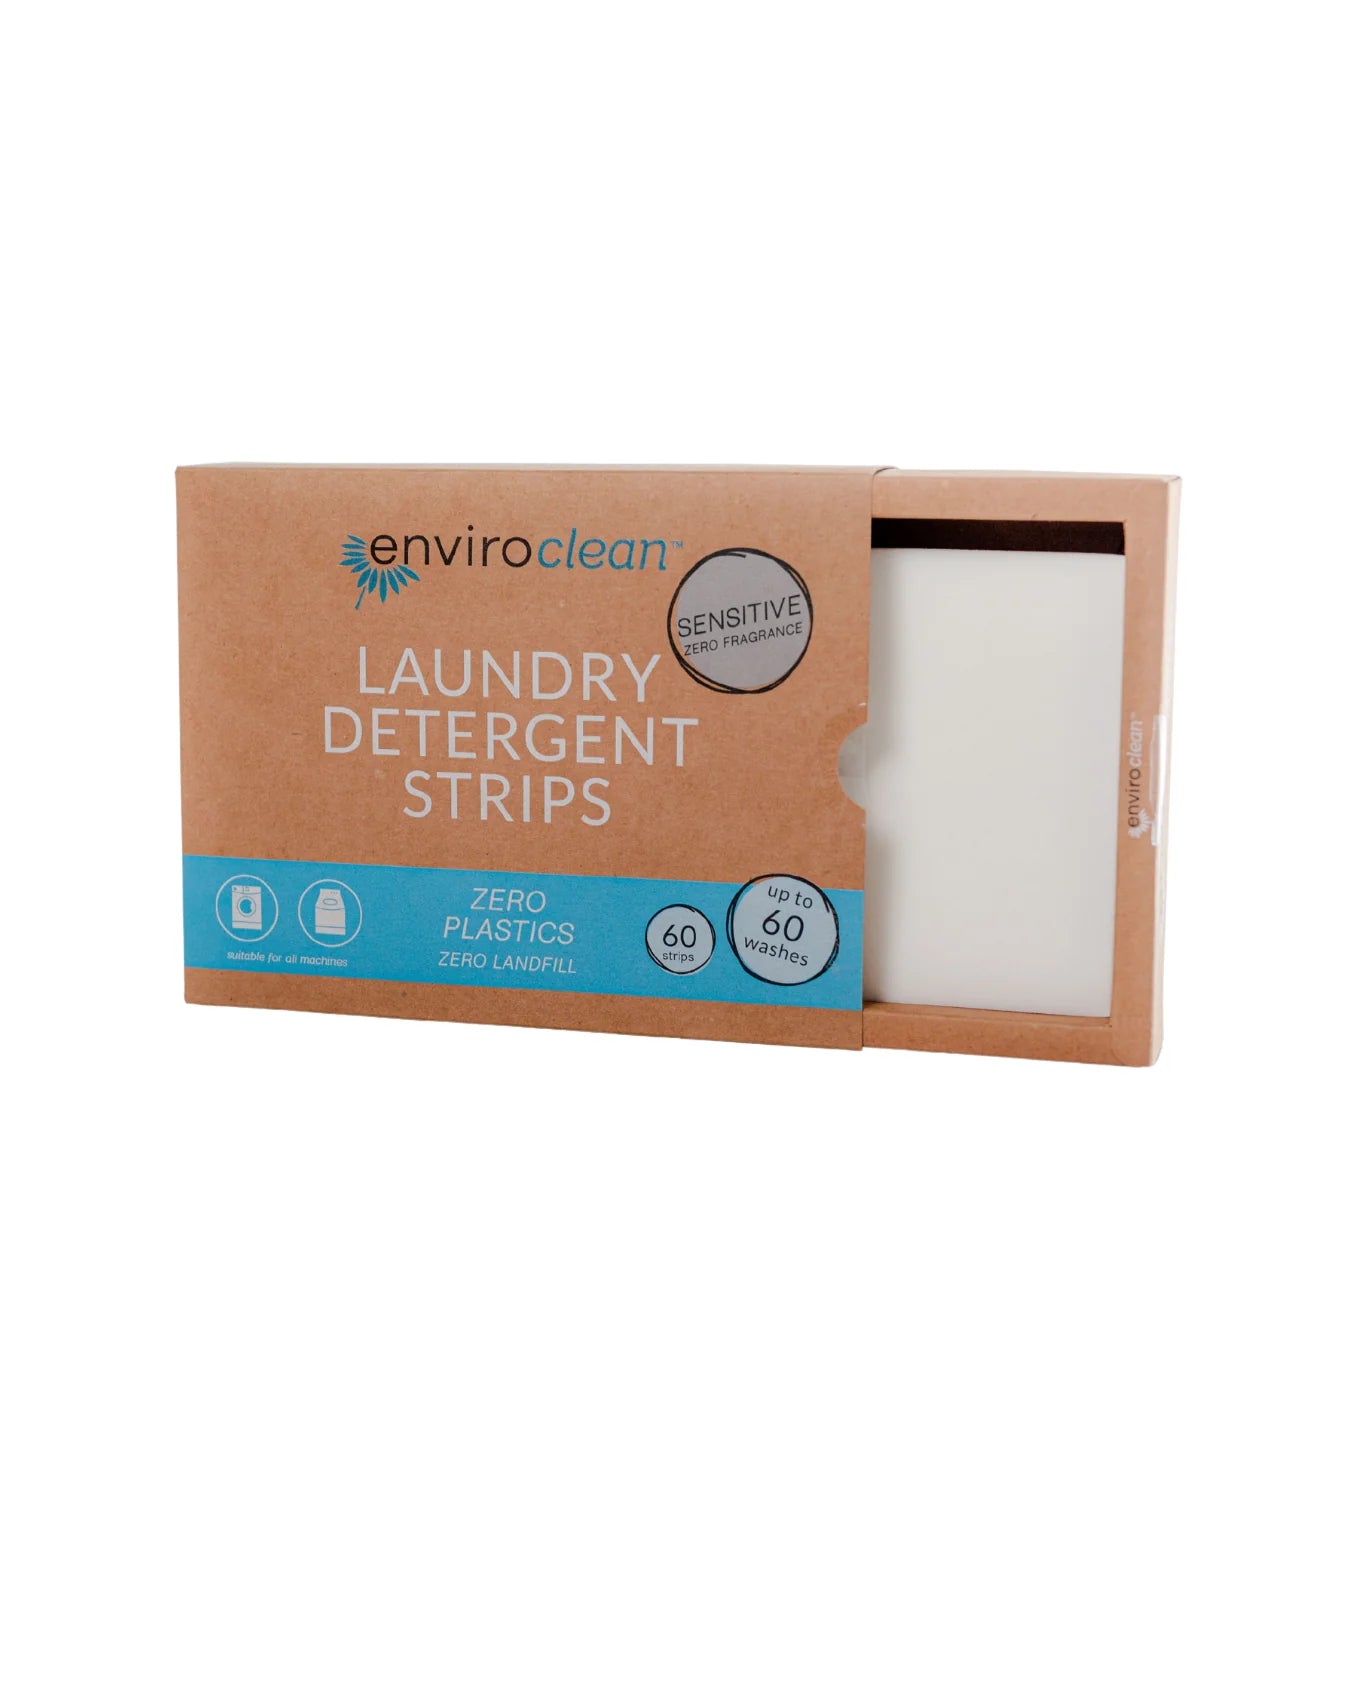 Envirocare earth – Sensitive Laundry Detergent Strips